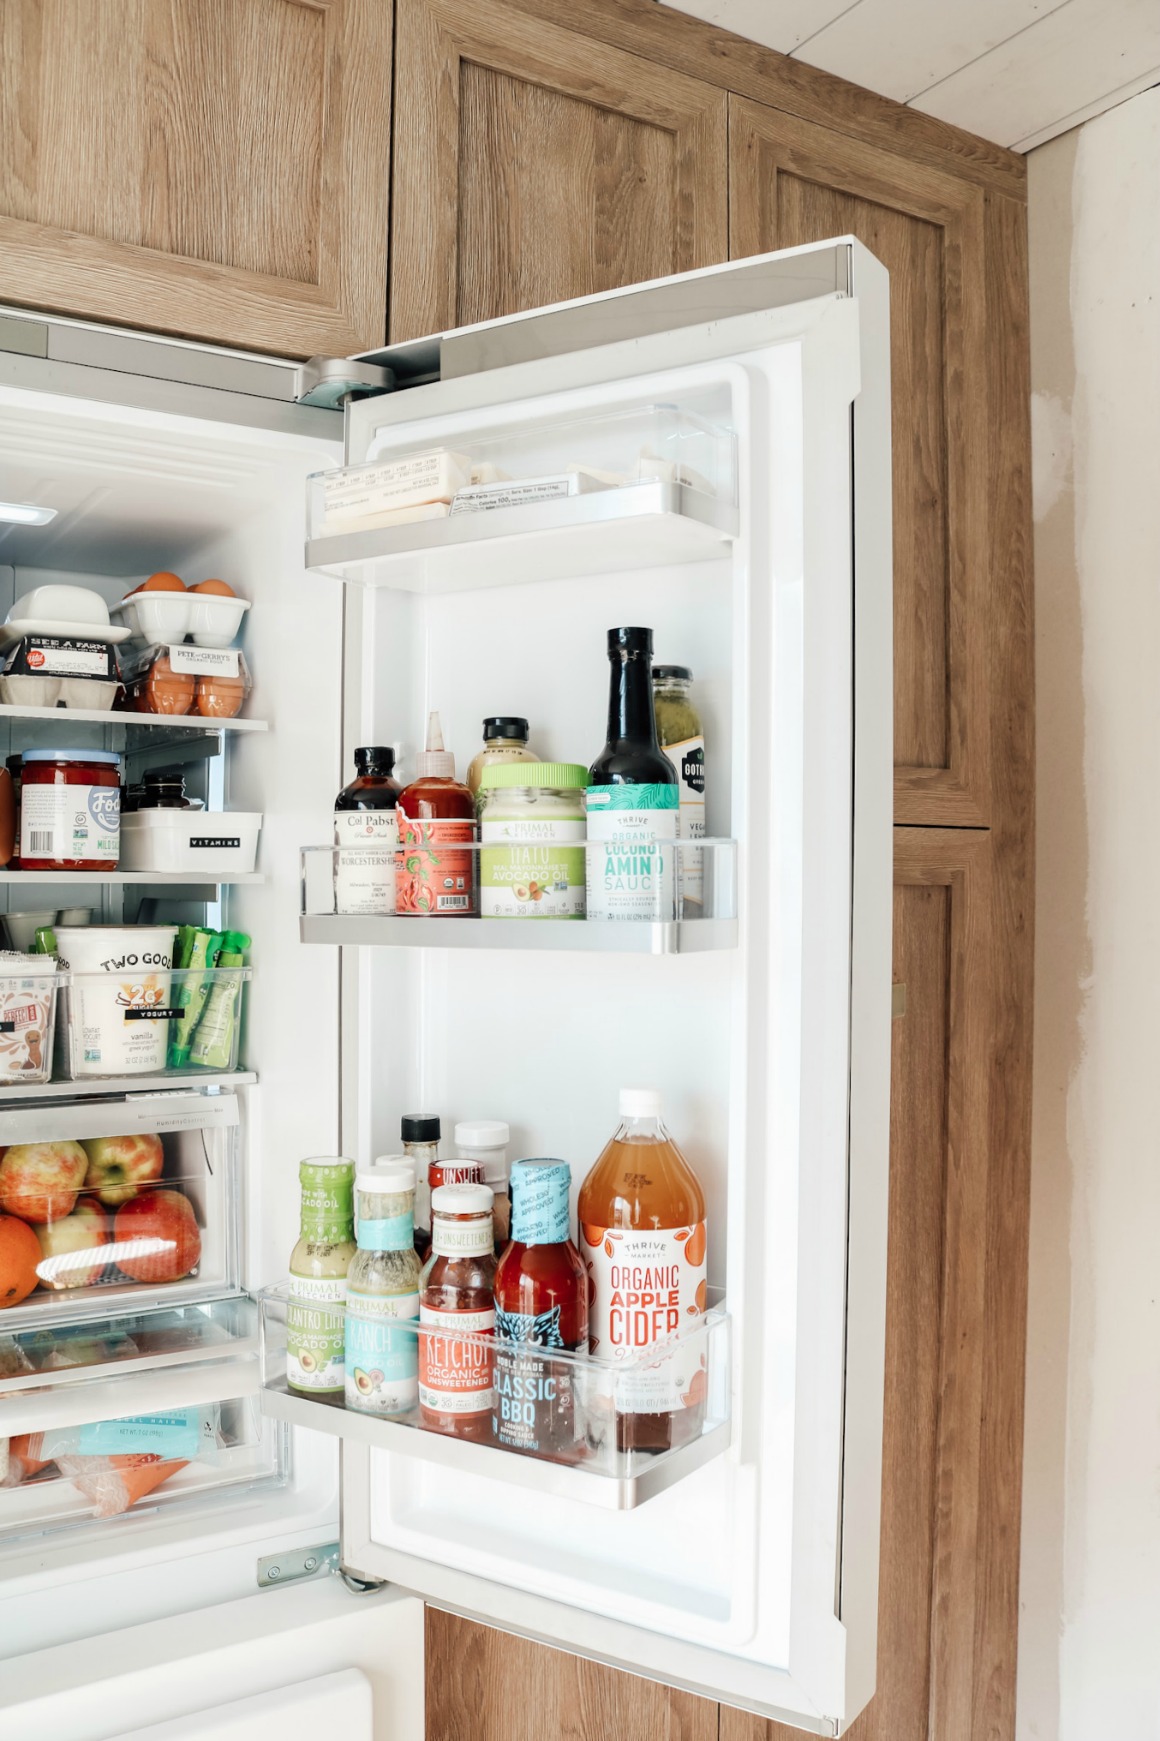 Top 10 fridge accessories ideas and inspiration